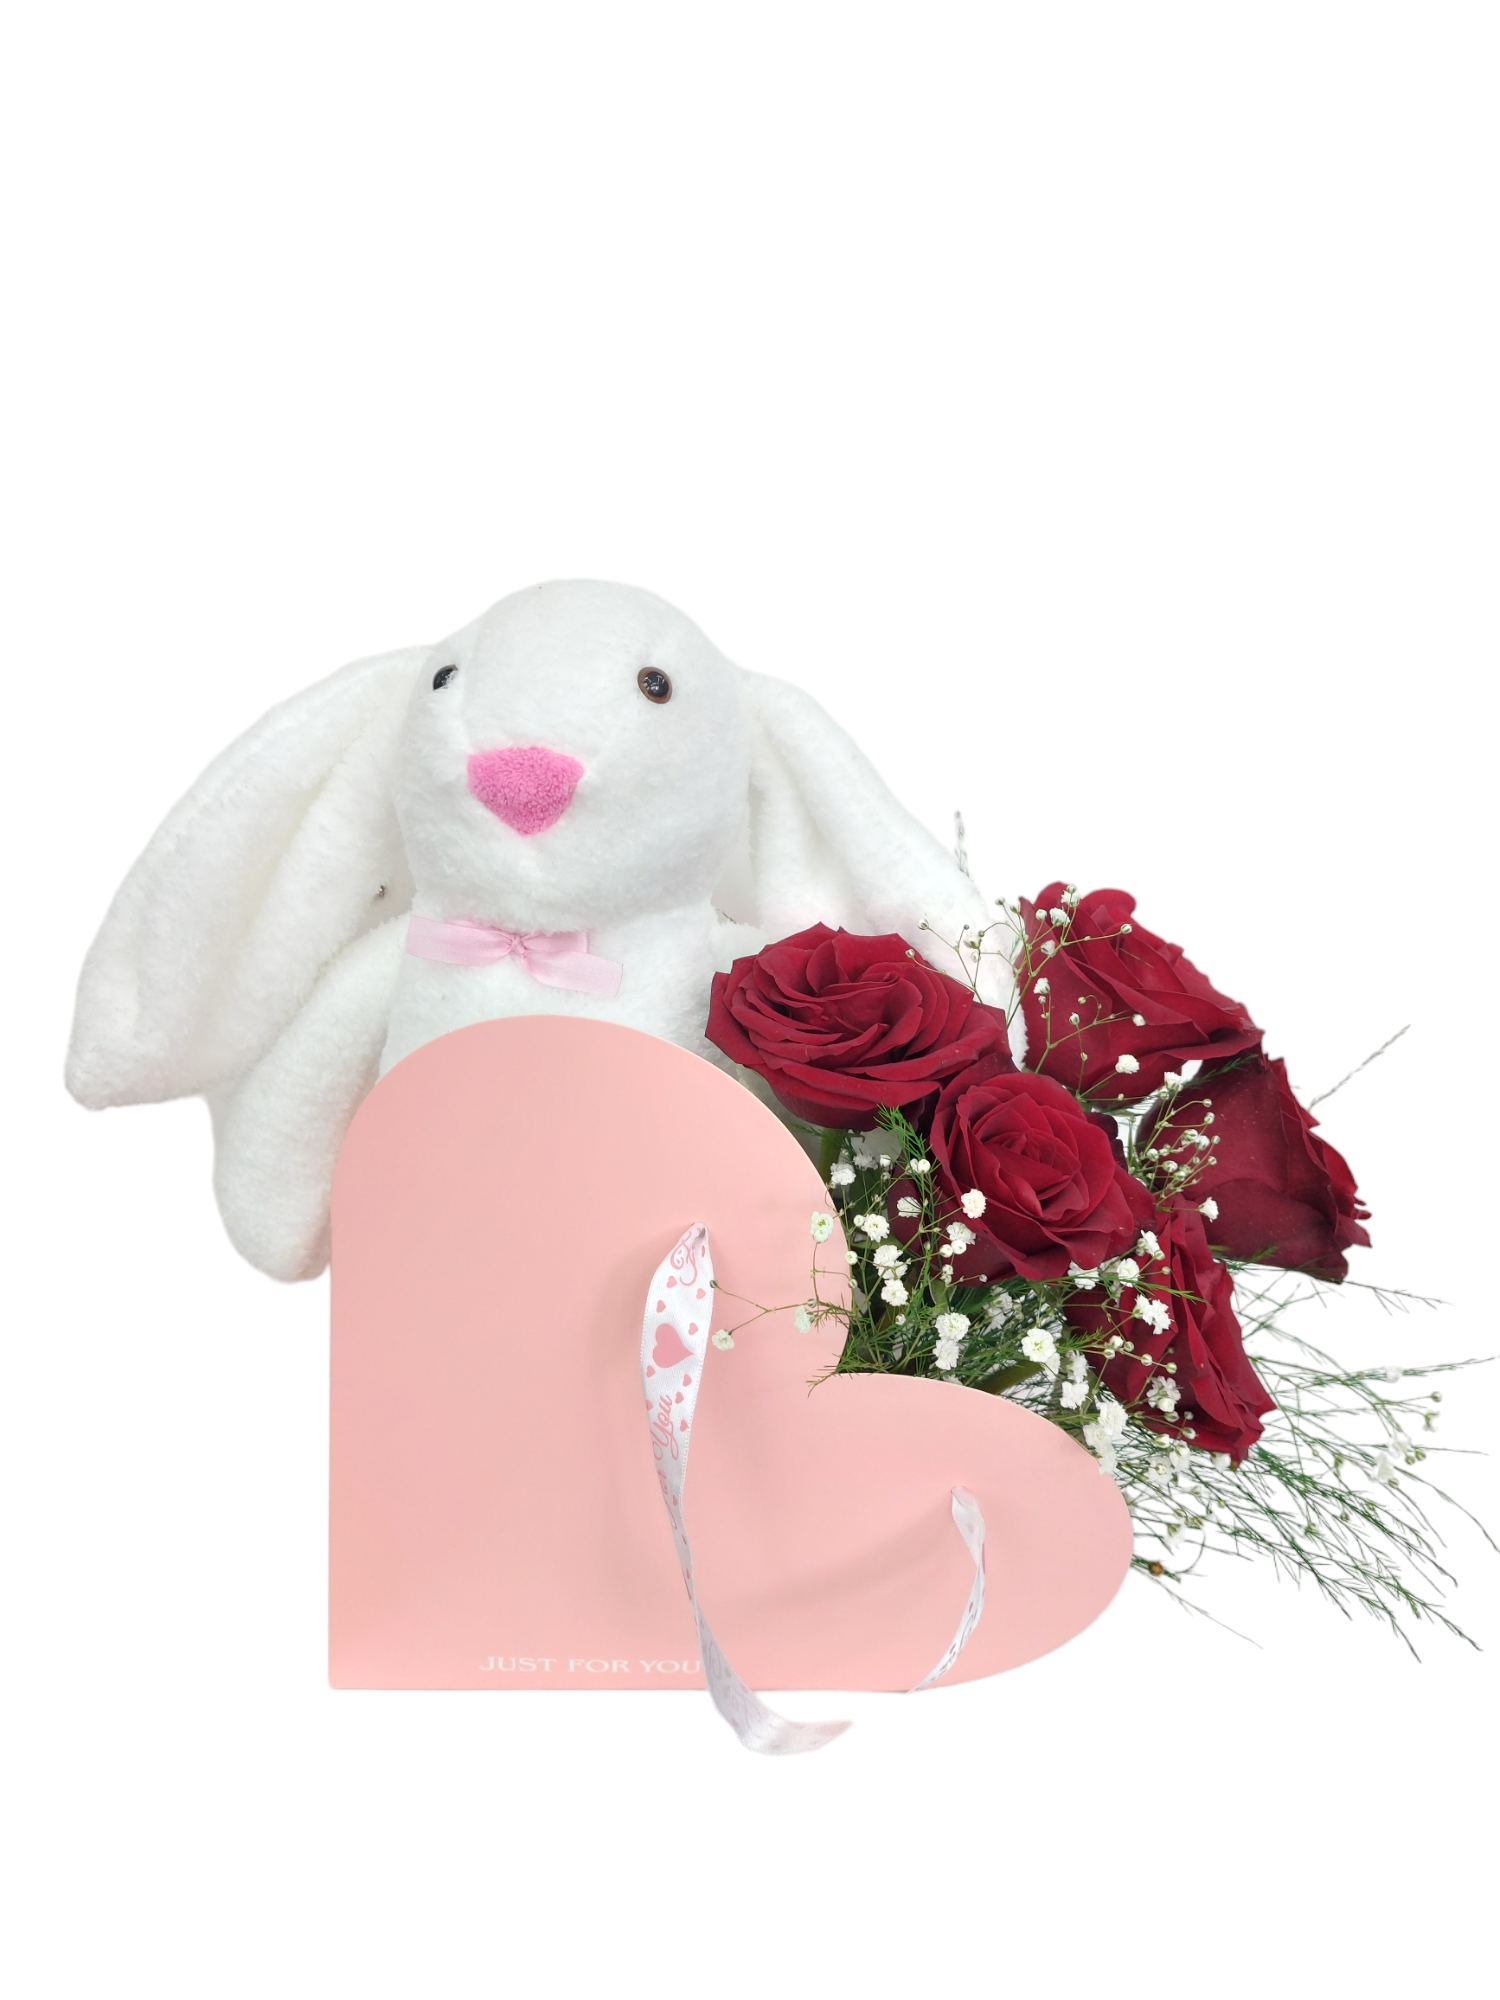 %20Cute%20Rabbit%20and%20Red%20Roses%20in%20a%20Pink%20Heart%20Flower%20Bag